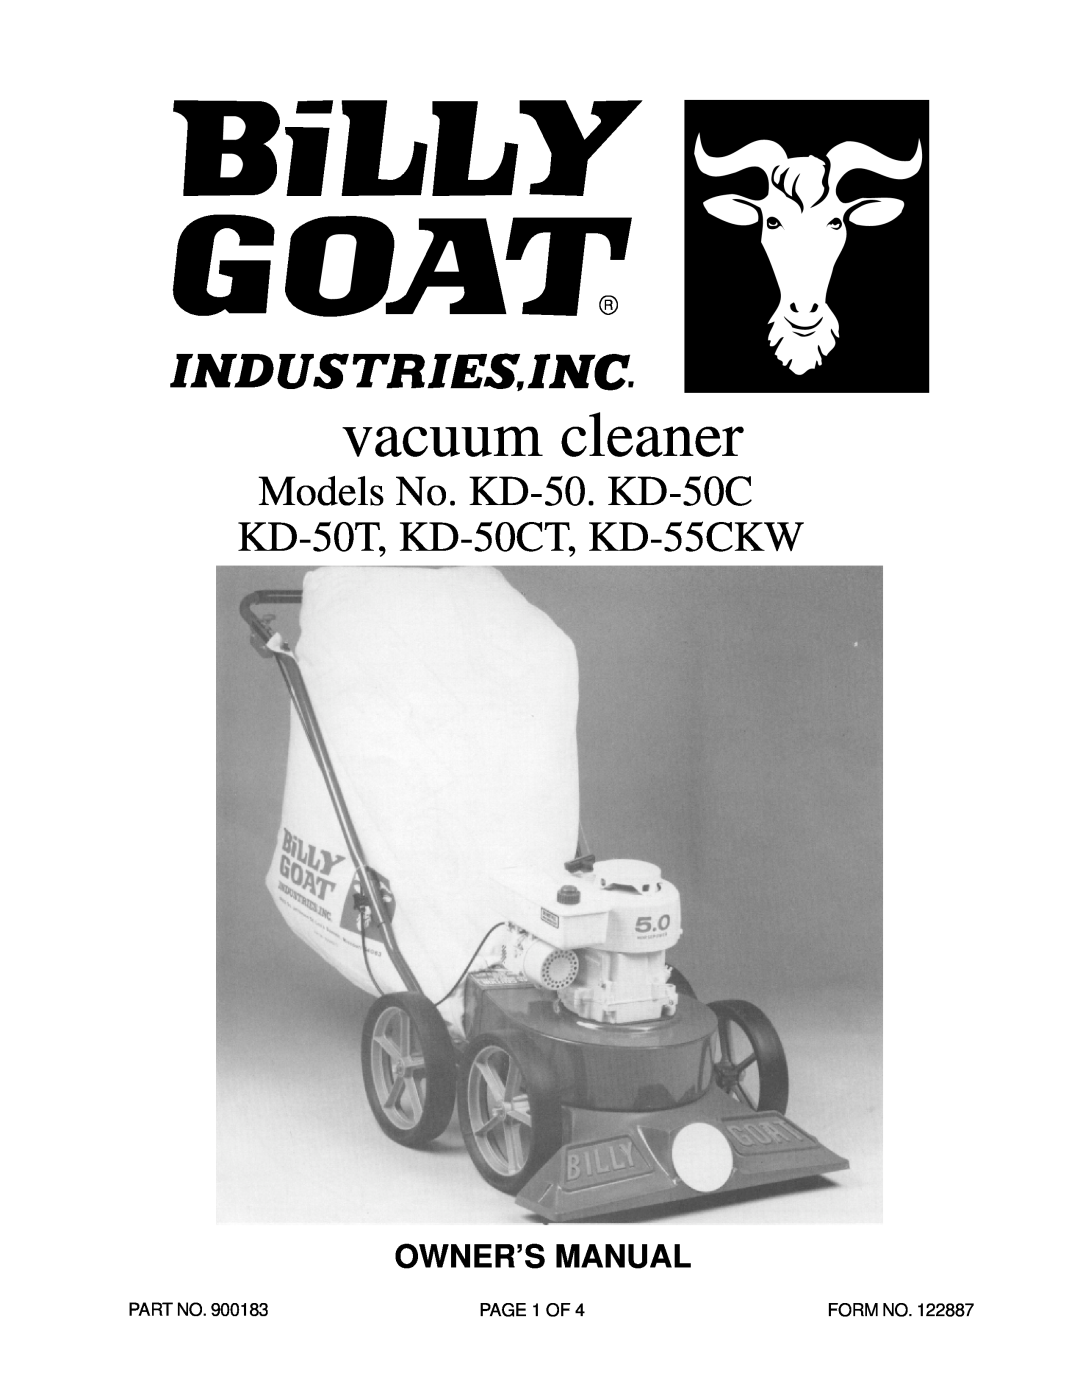 Billy Goat KD 55CKW owner manual vacuum cleaner, Models No. KD-50. KD-50C KD-50T, KD-50CT, KD-55CKW, Owner’S Manual 